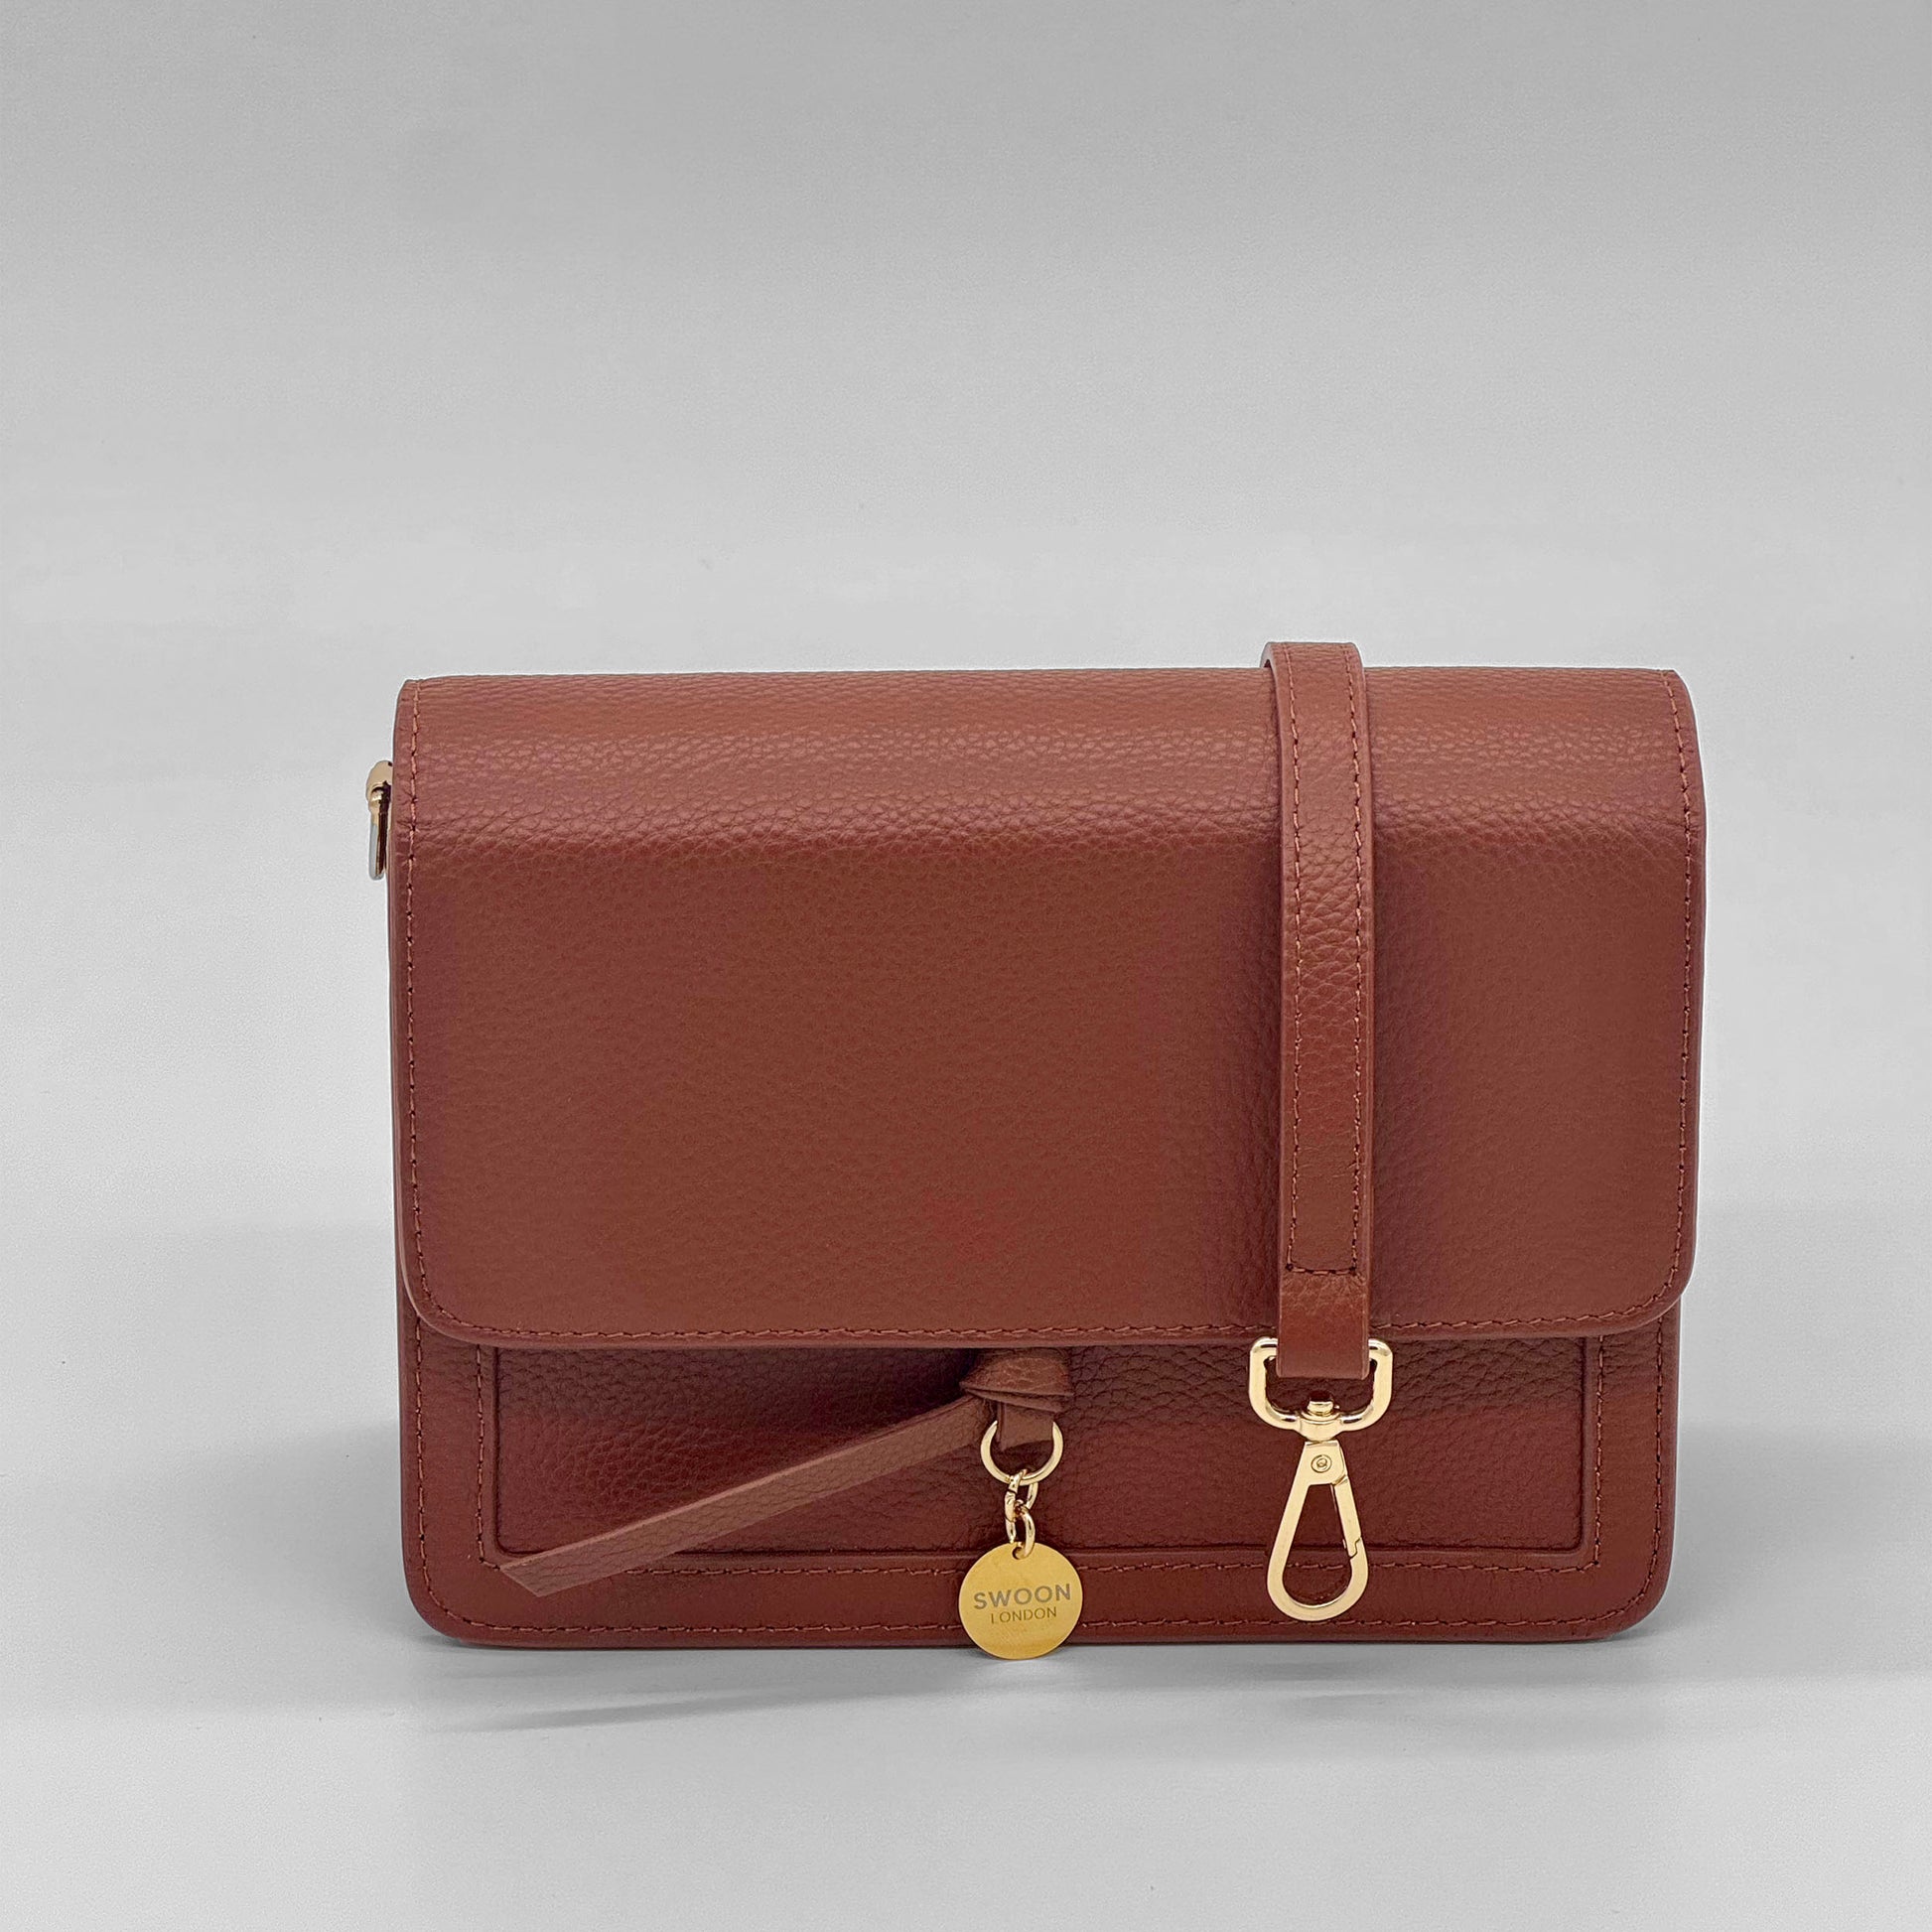 Bag with Matching Leather Strap